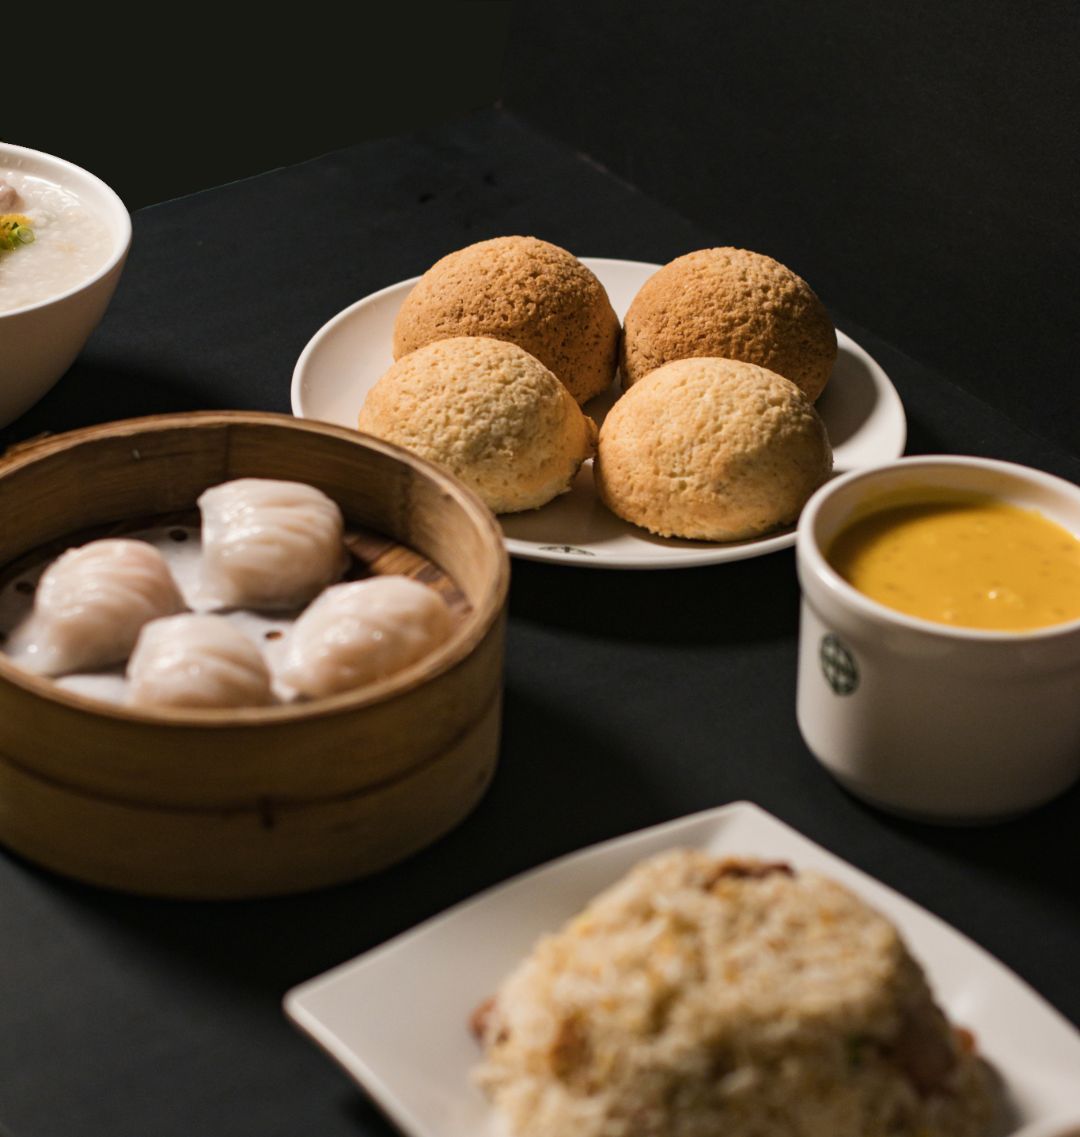 13 Restaurants For The Best Yum Cha In Melbourne [2022 Guide]